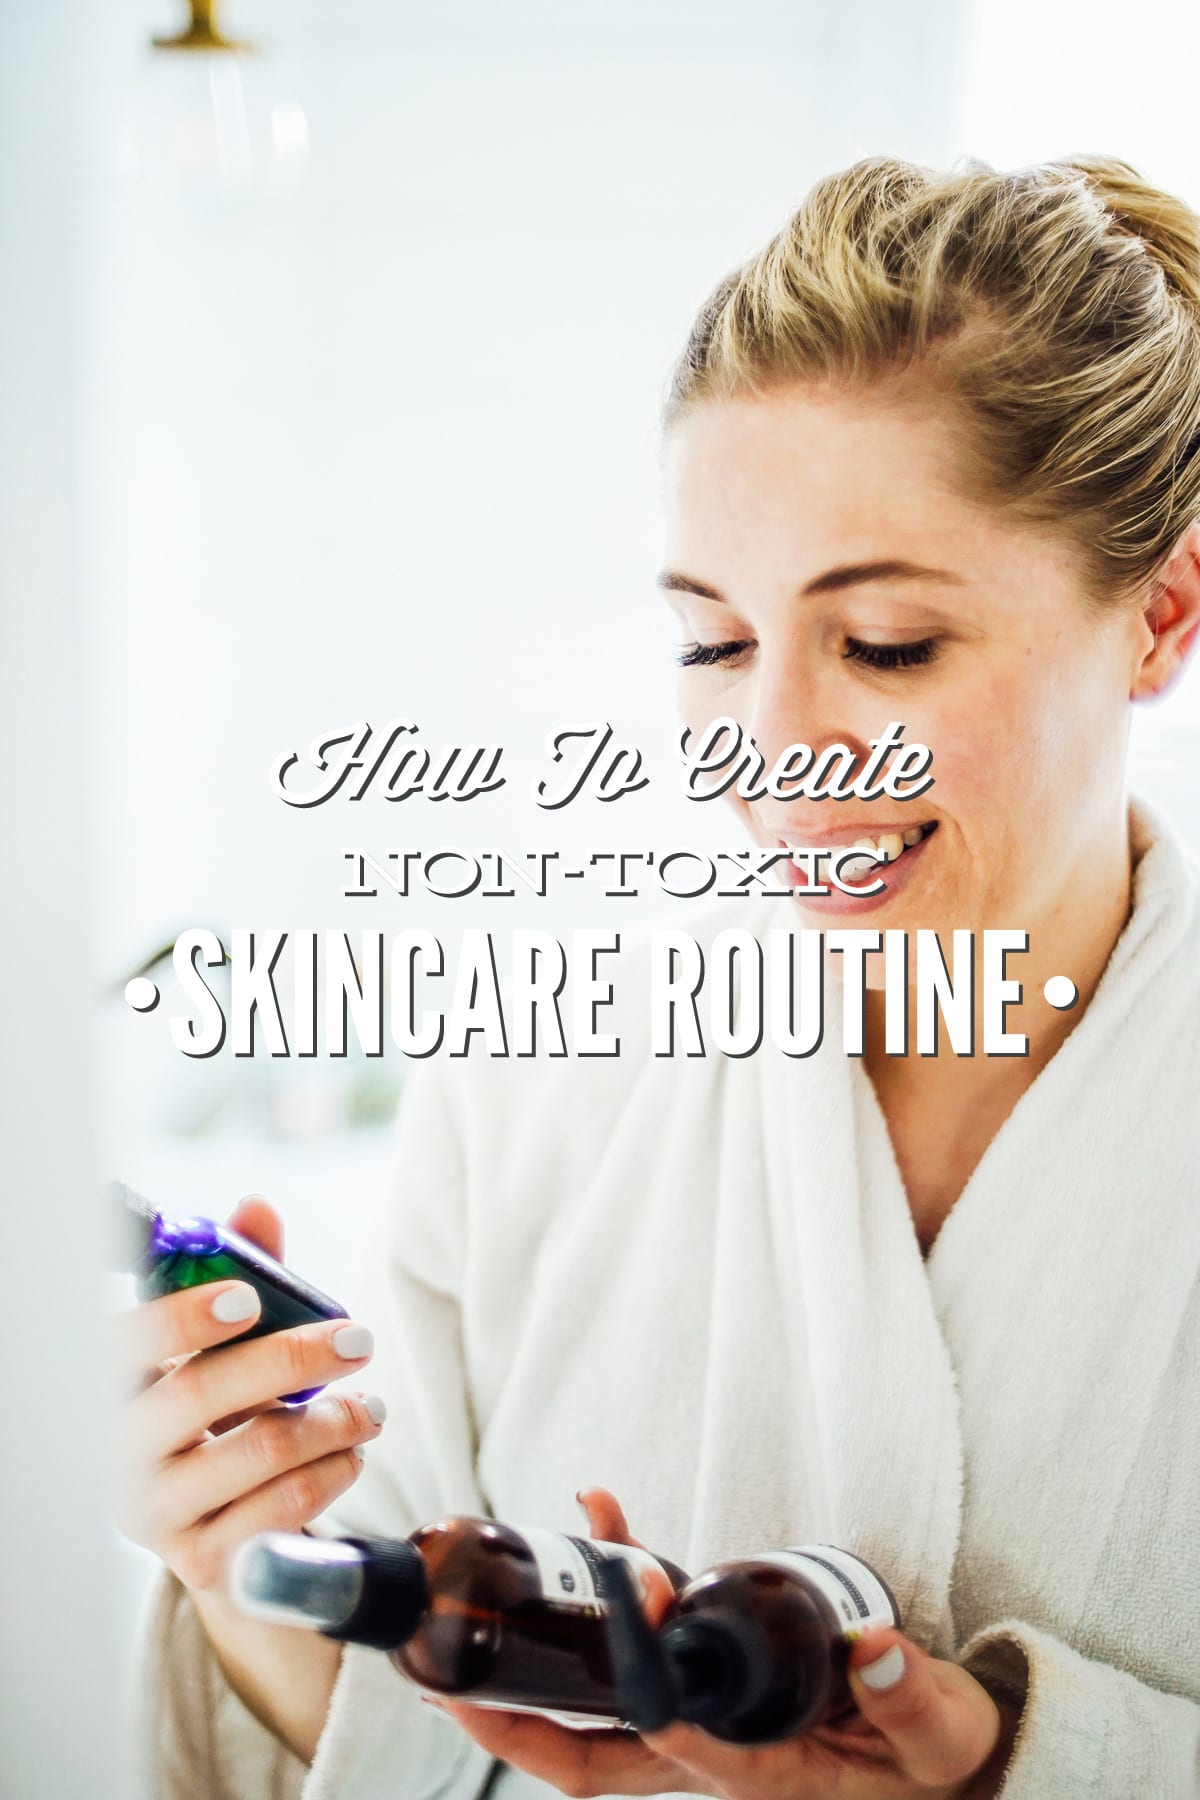 Chemical-free skincare routine